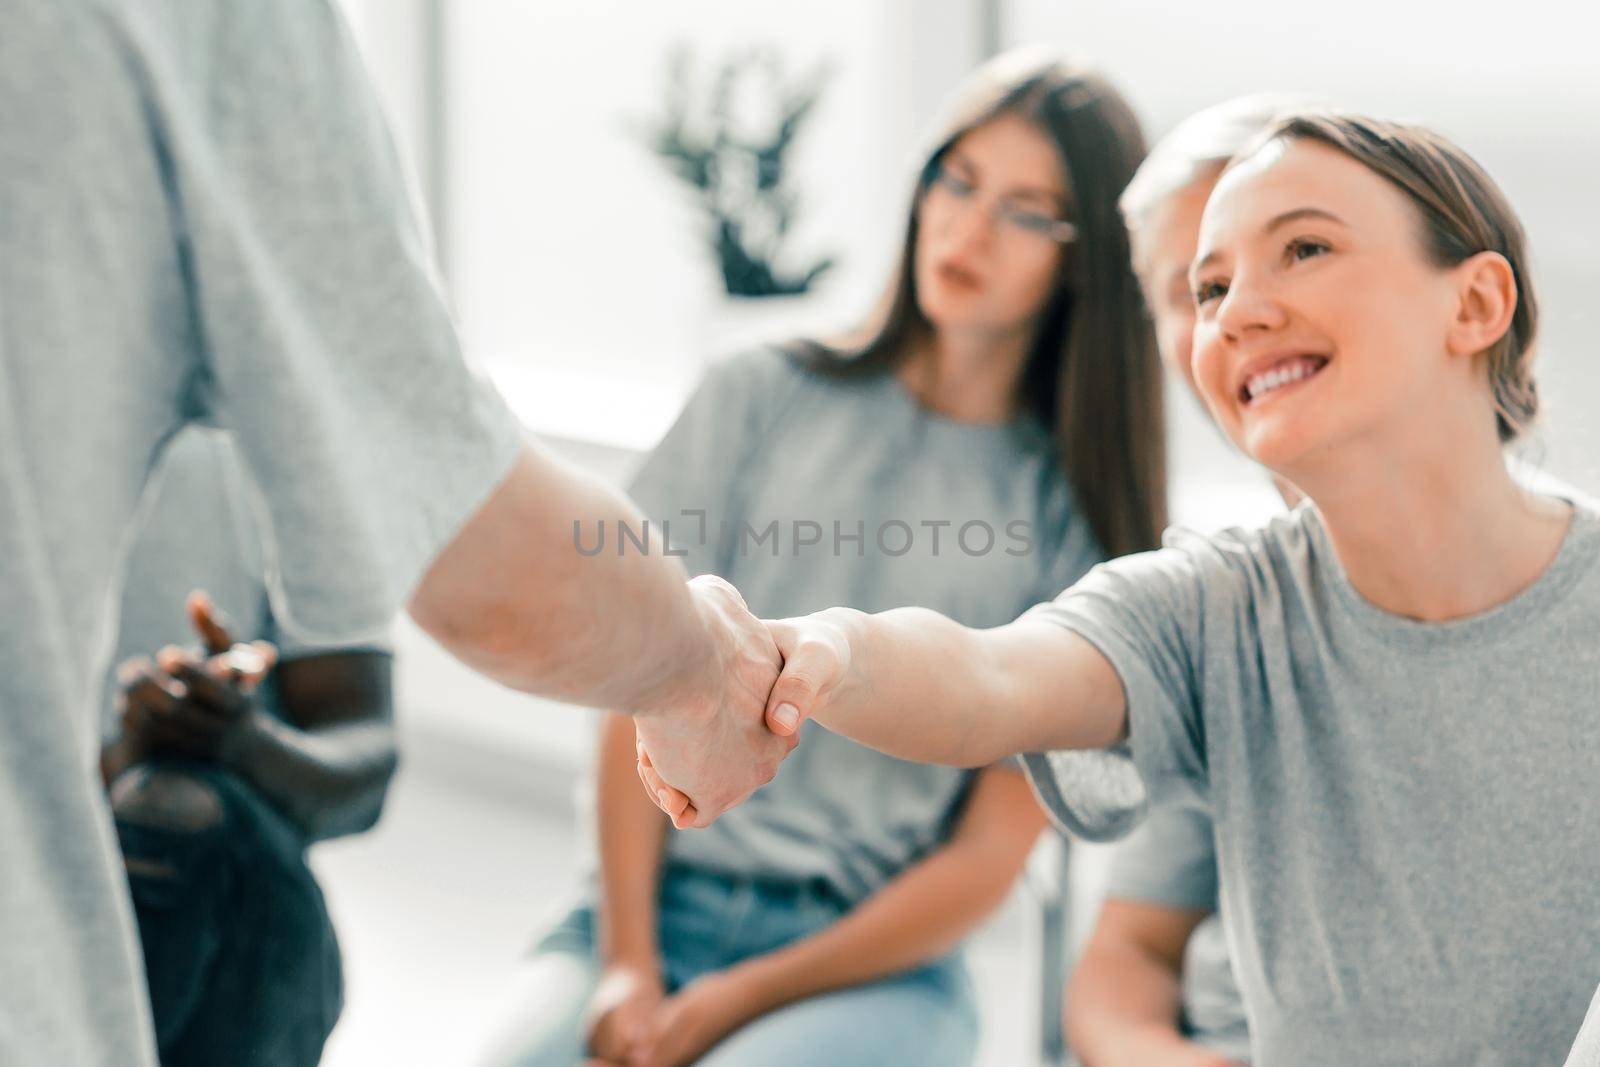 young employees greeting each other with a handshake by SmartPhotoLab